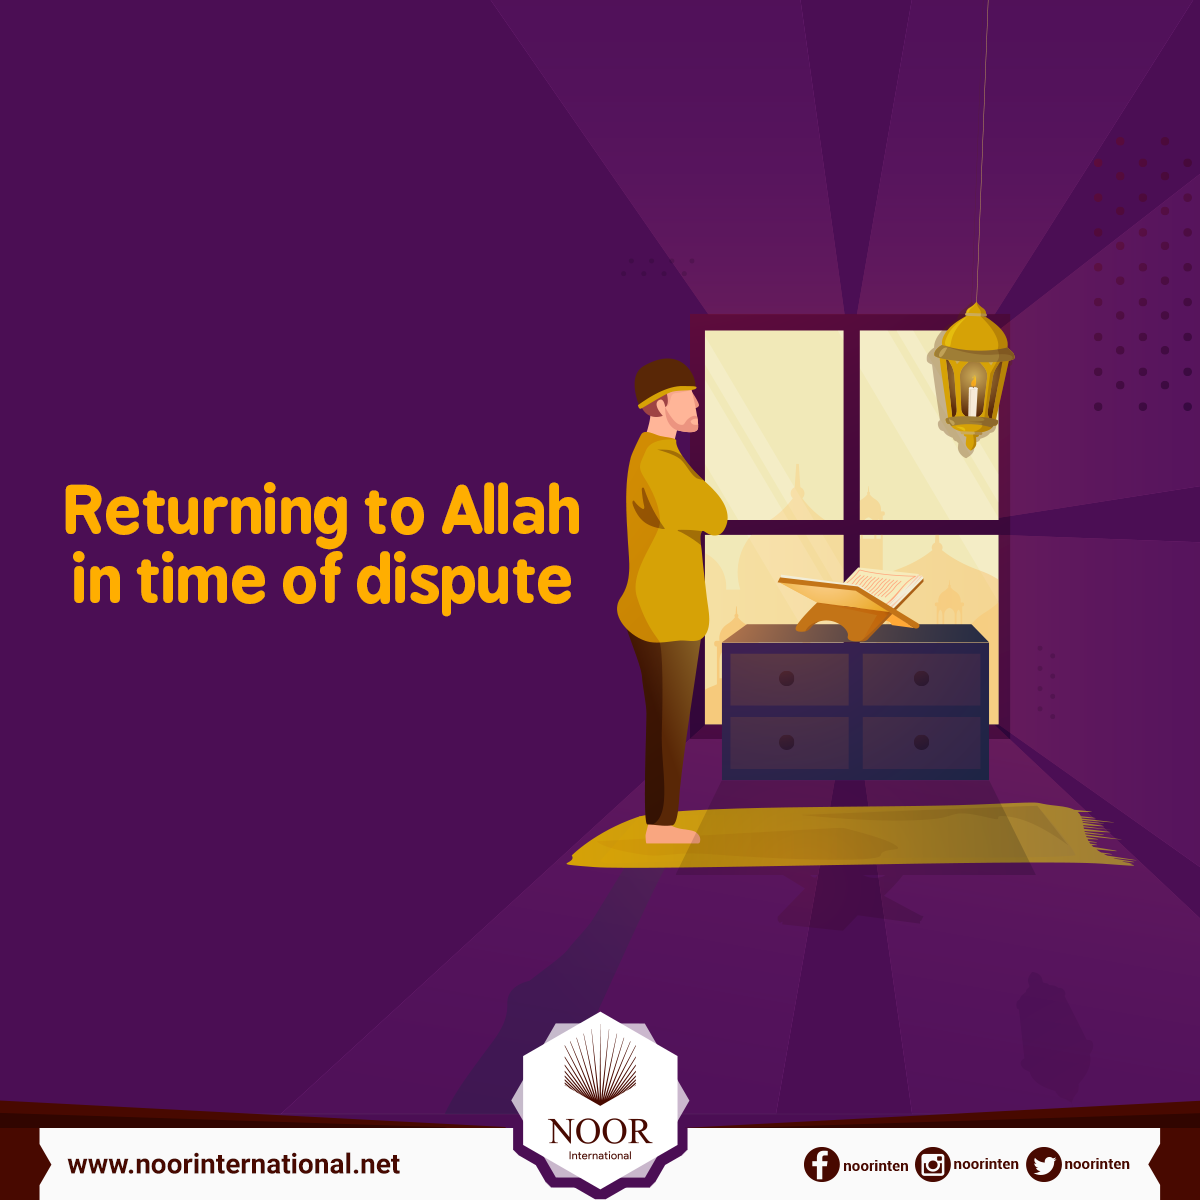 Returning to Allah in time of dispute